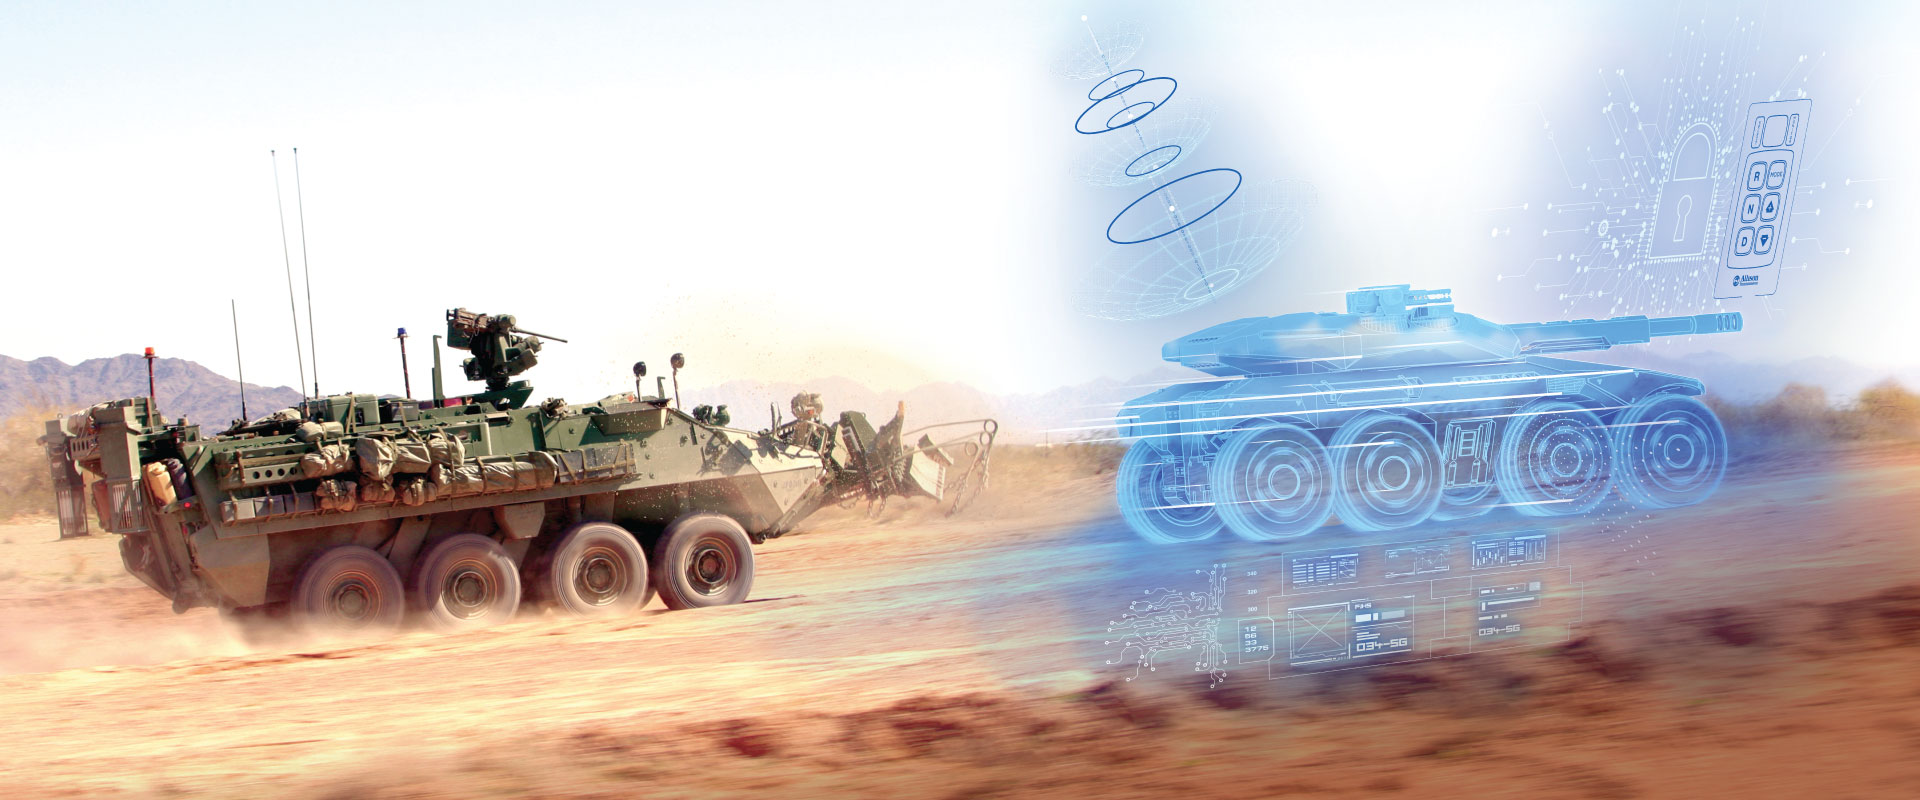 Wheeled defense vehicle in action with a rendered wheeled defense vehicle in blue.